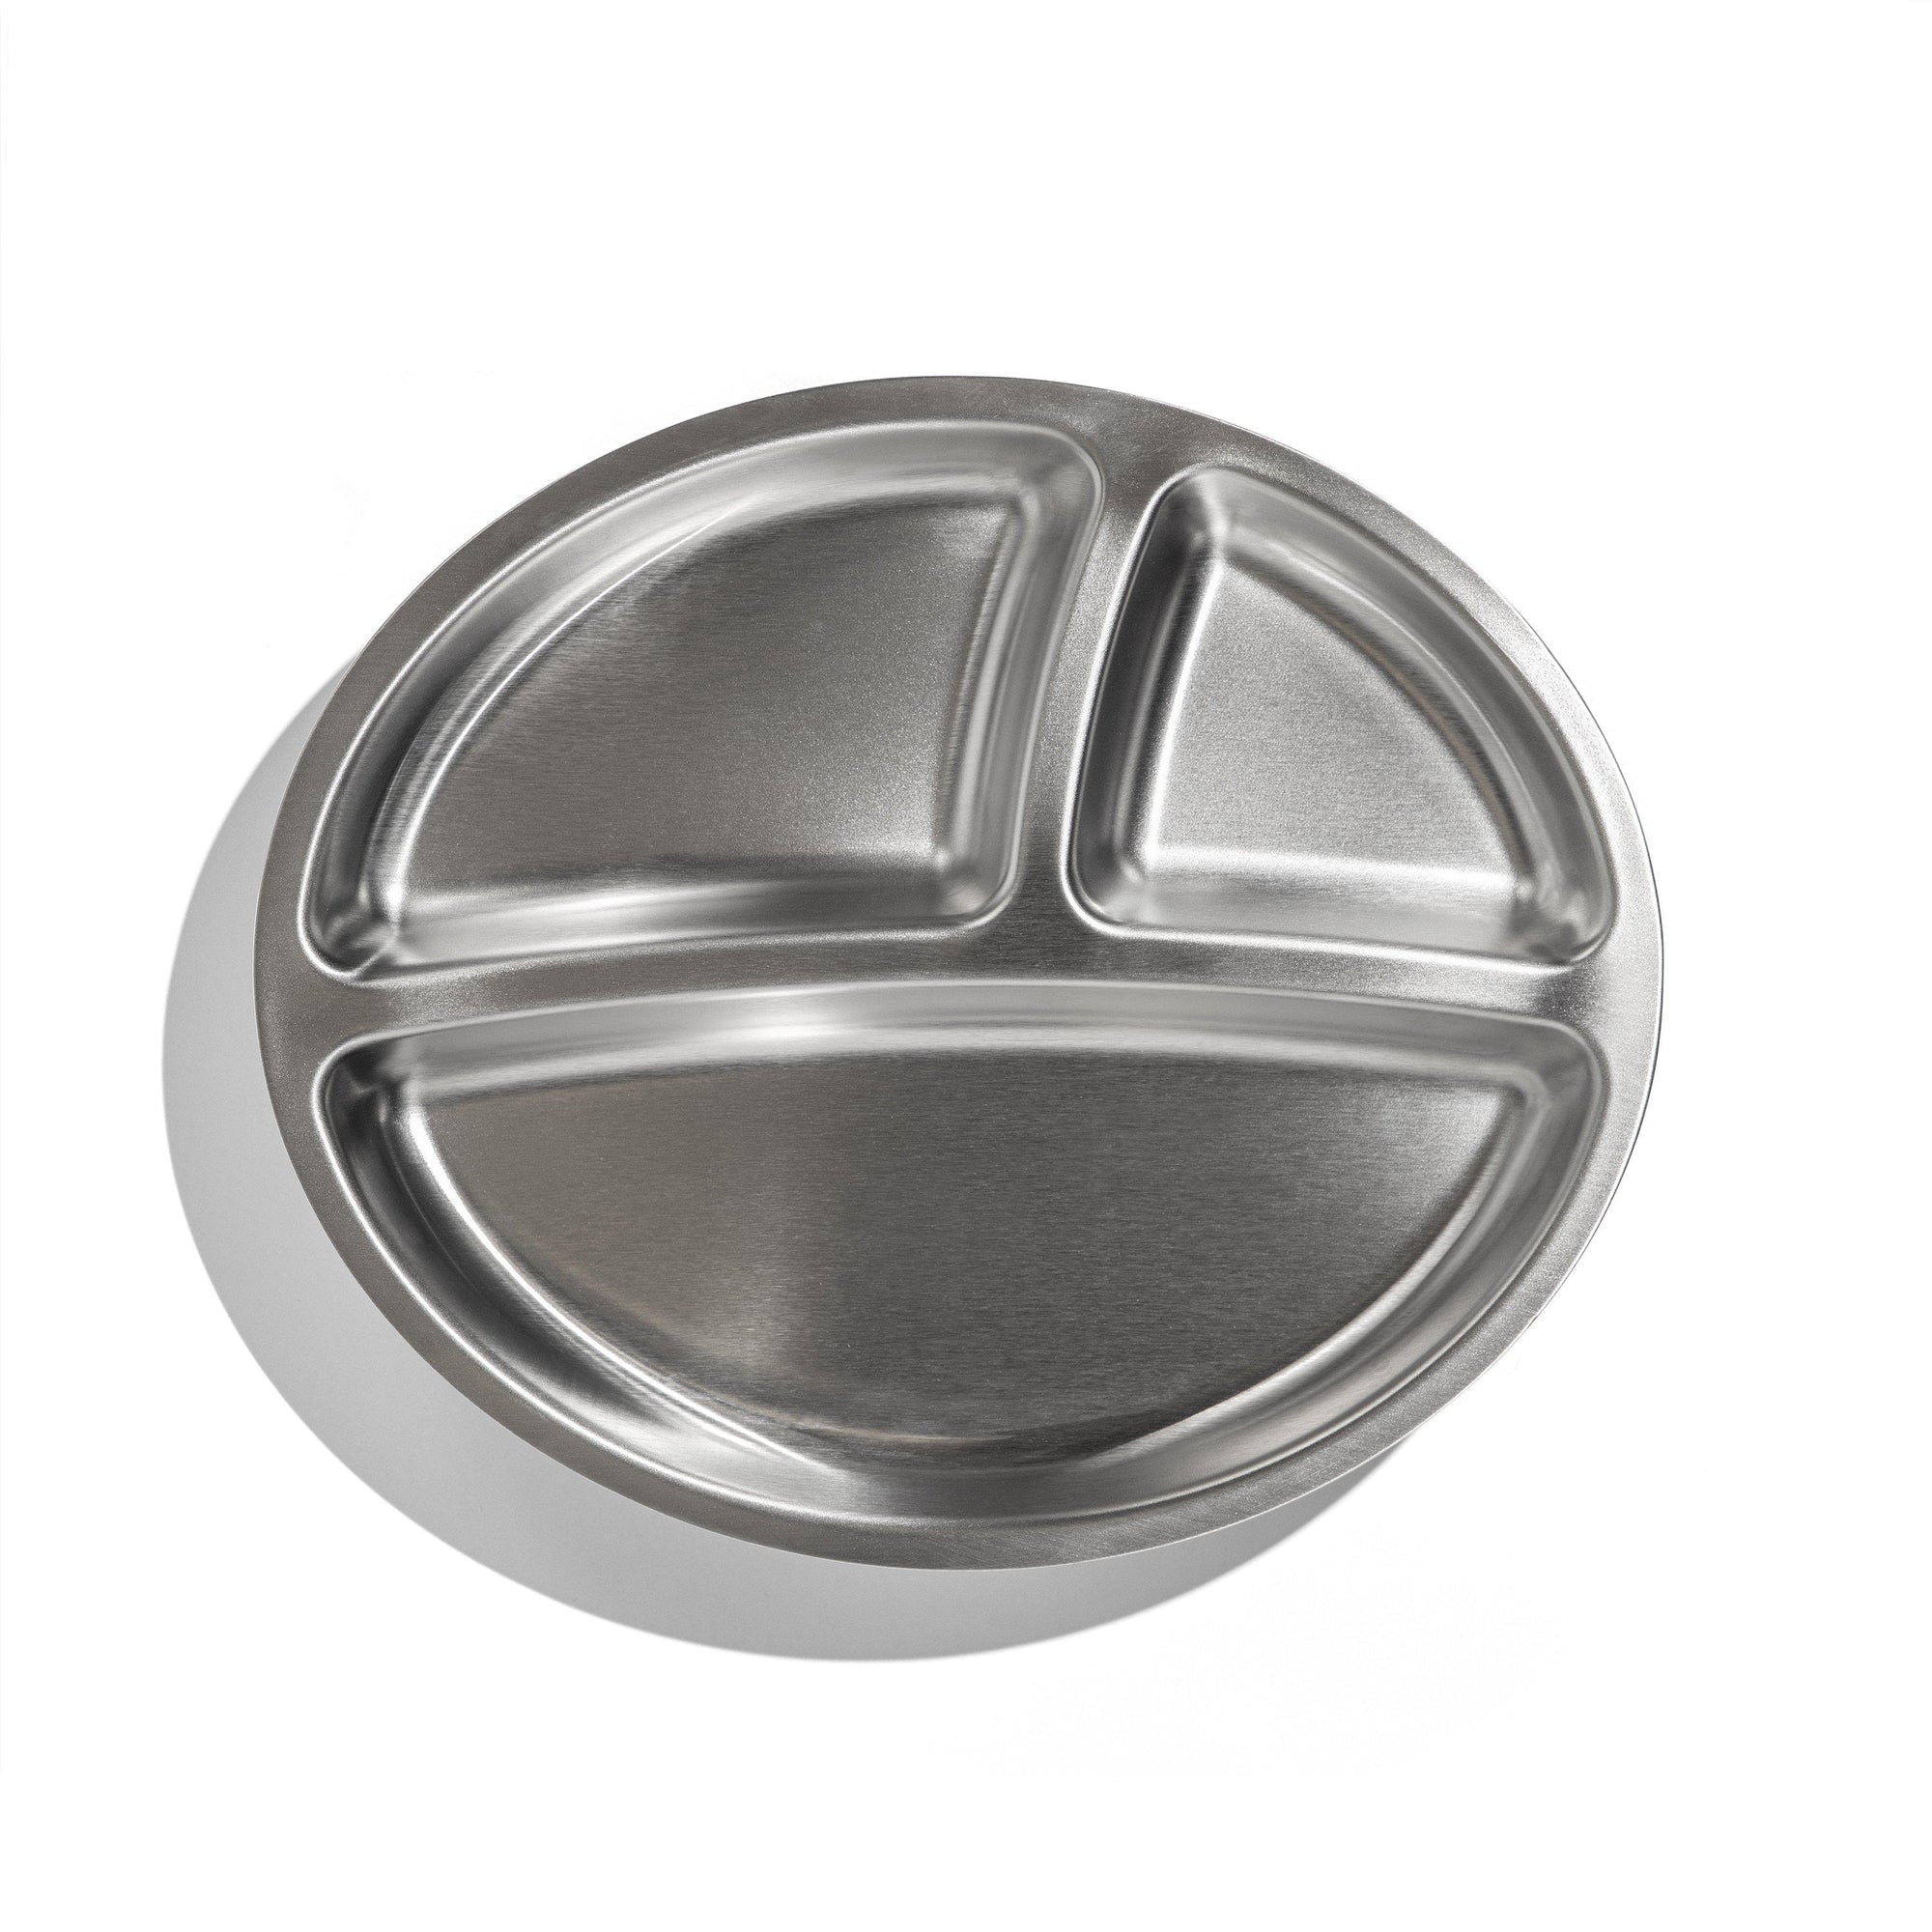 Avanchy Stainless Steel Suction Baby Bowl + Air Tight Lid – Crib & Kids